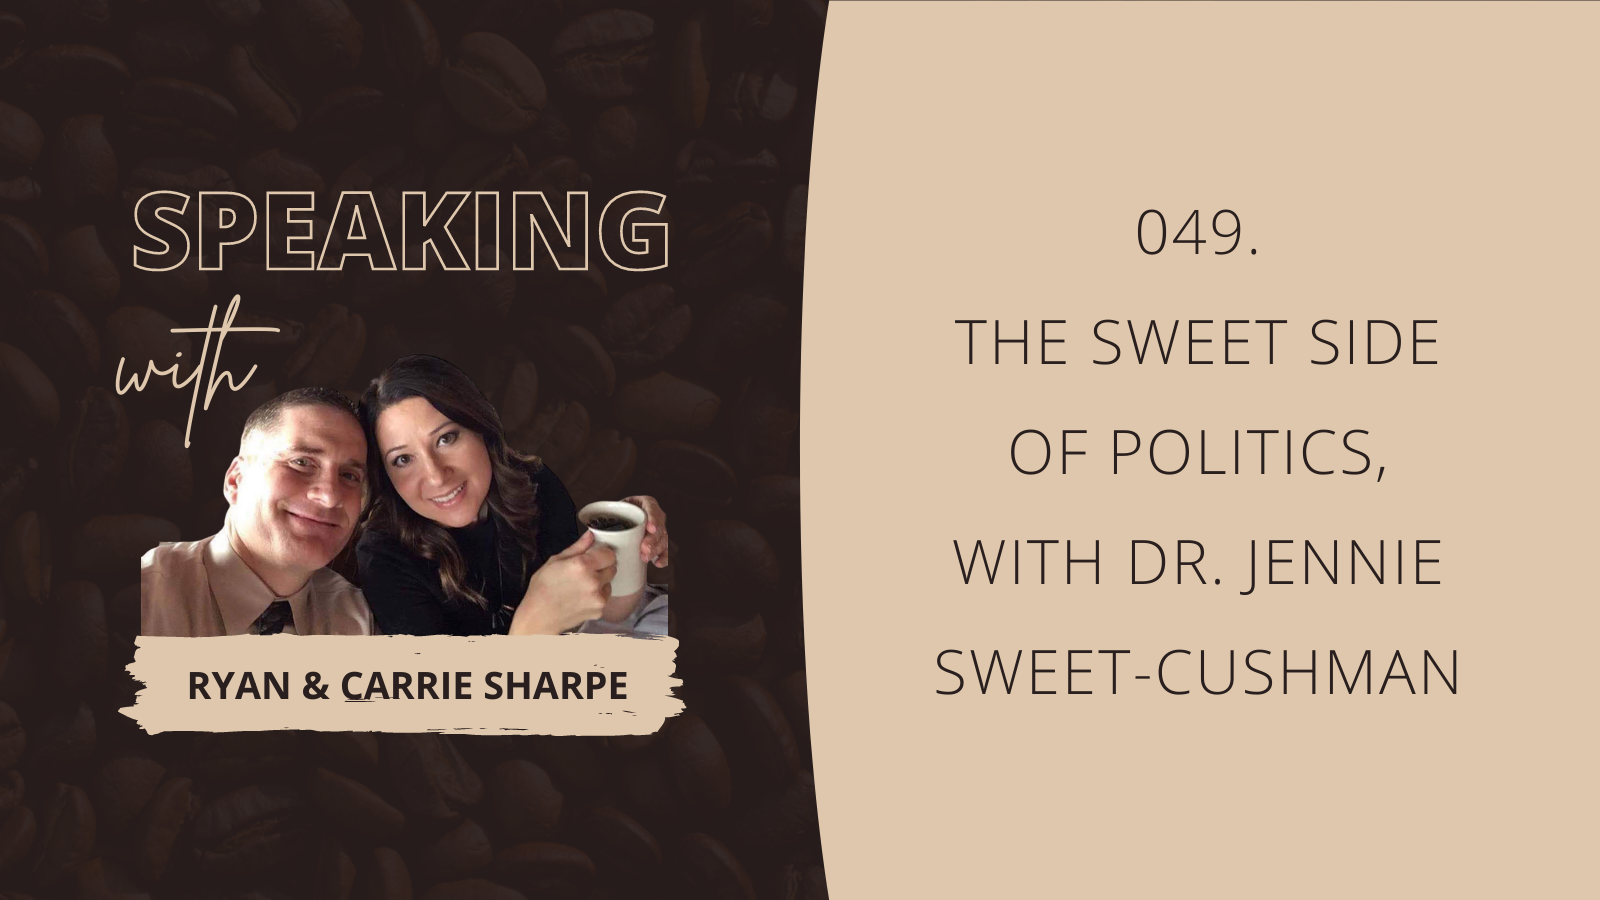 049. The Sweet Side Of Politics, with Dr. Jennie Sweet-Cushman [COMMUNICATION FOUNDATION SERIES] | Speaking with Ryan & Carrie Sharpe podcast